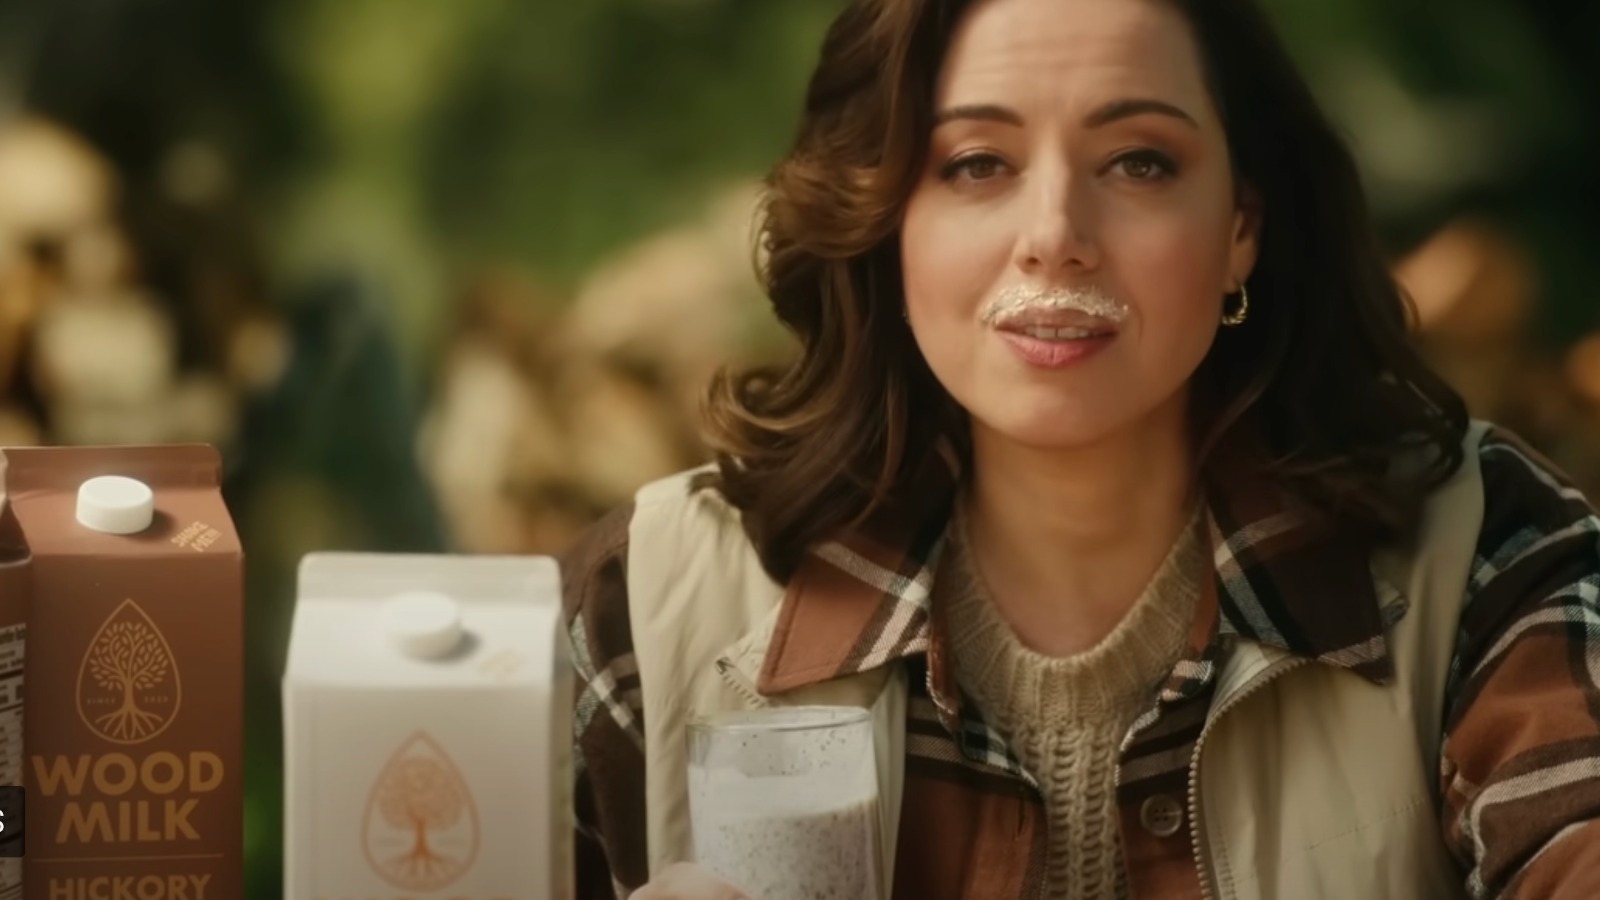 Aubrey Plaza’s Wood Milk Ad Is Under Fire For Being Too Pro-Dairy – Mashed